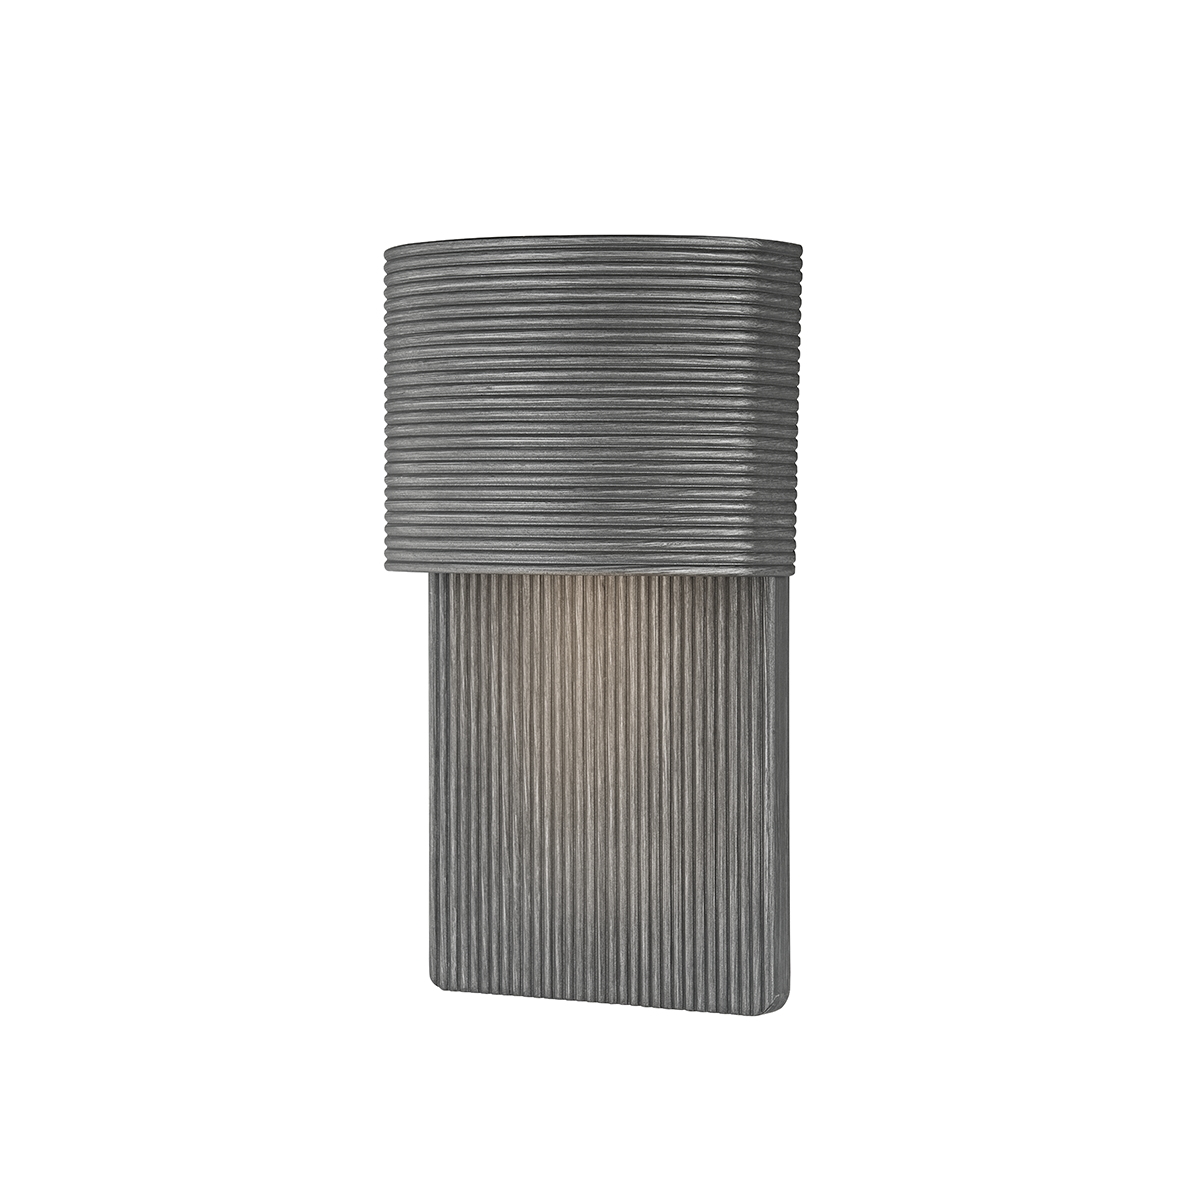 Troy Lighting 1 LIGHT SMALL EXTERIOR WALL SCONCE B1212 Outdoor l Wall Troy Lighting GRAPHITE  